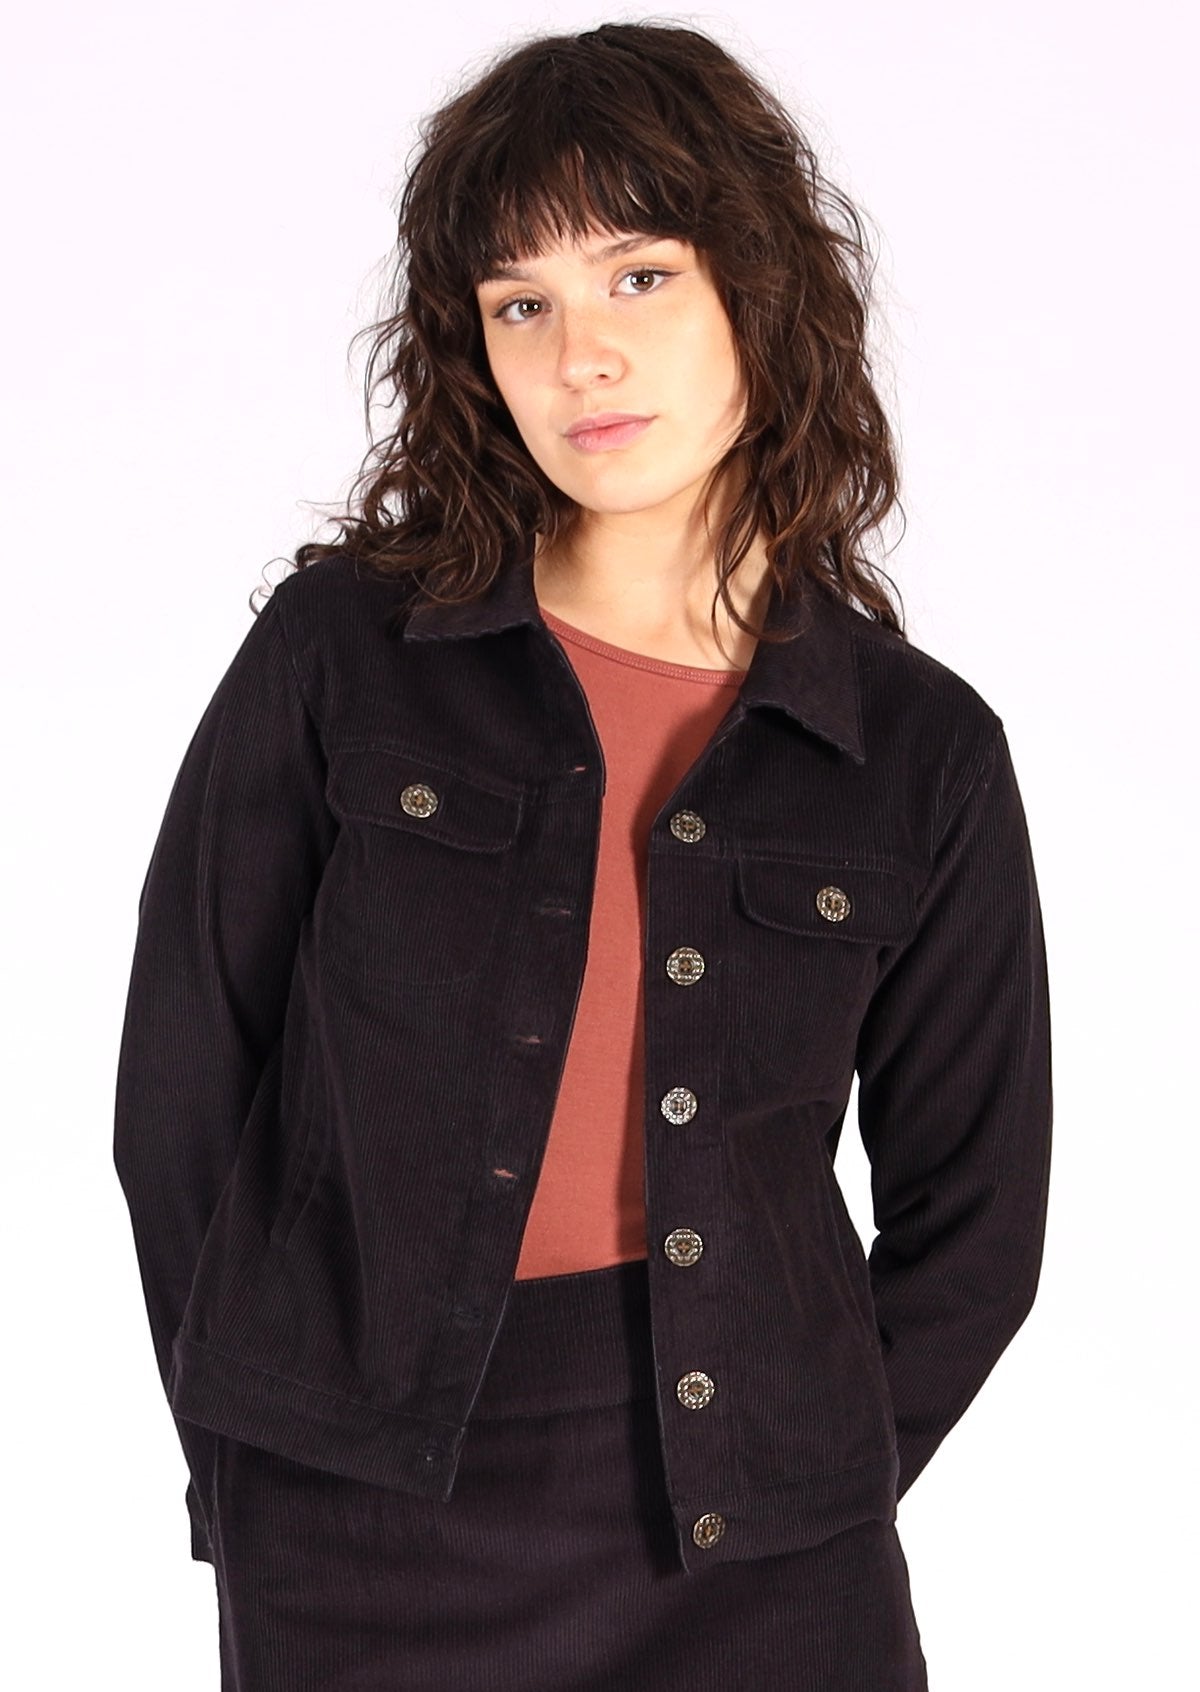 Dark grey corduroy jacket with breast and front pockets